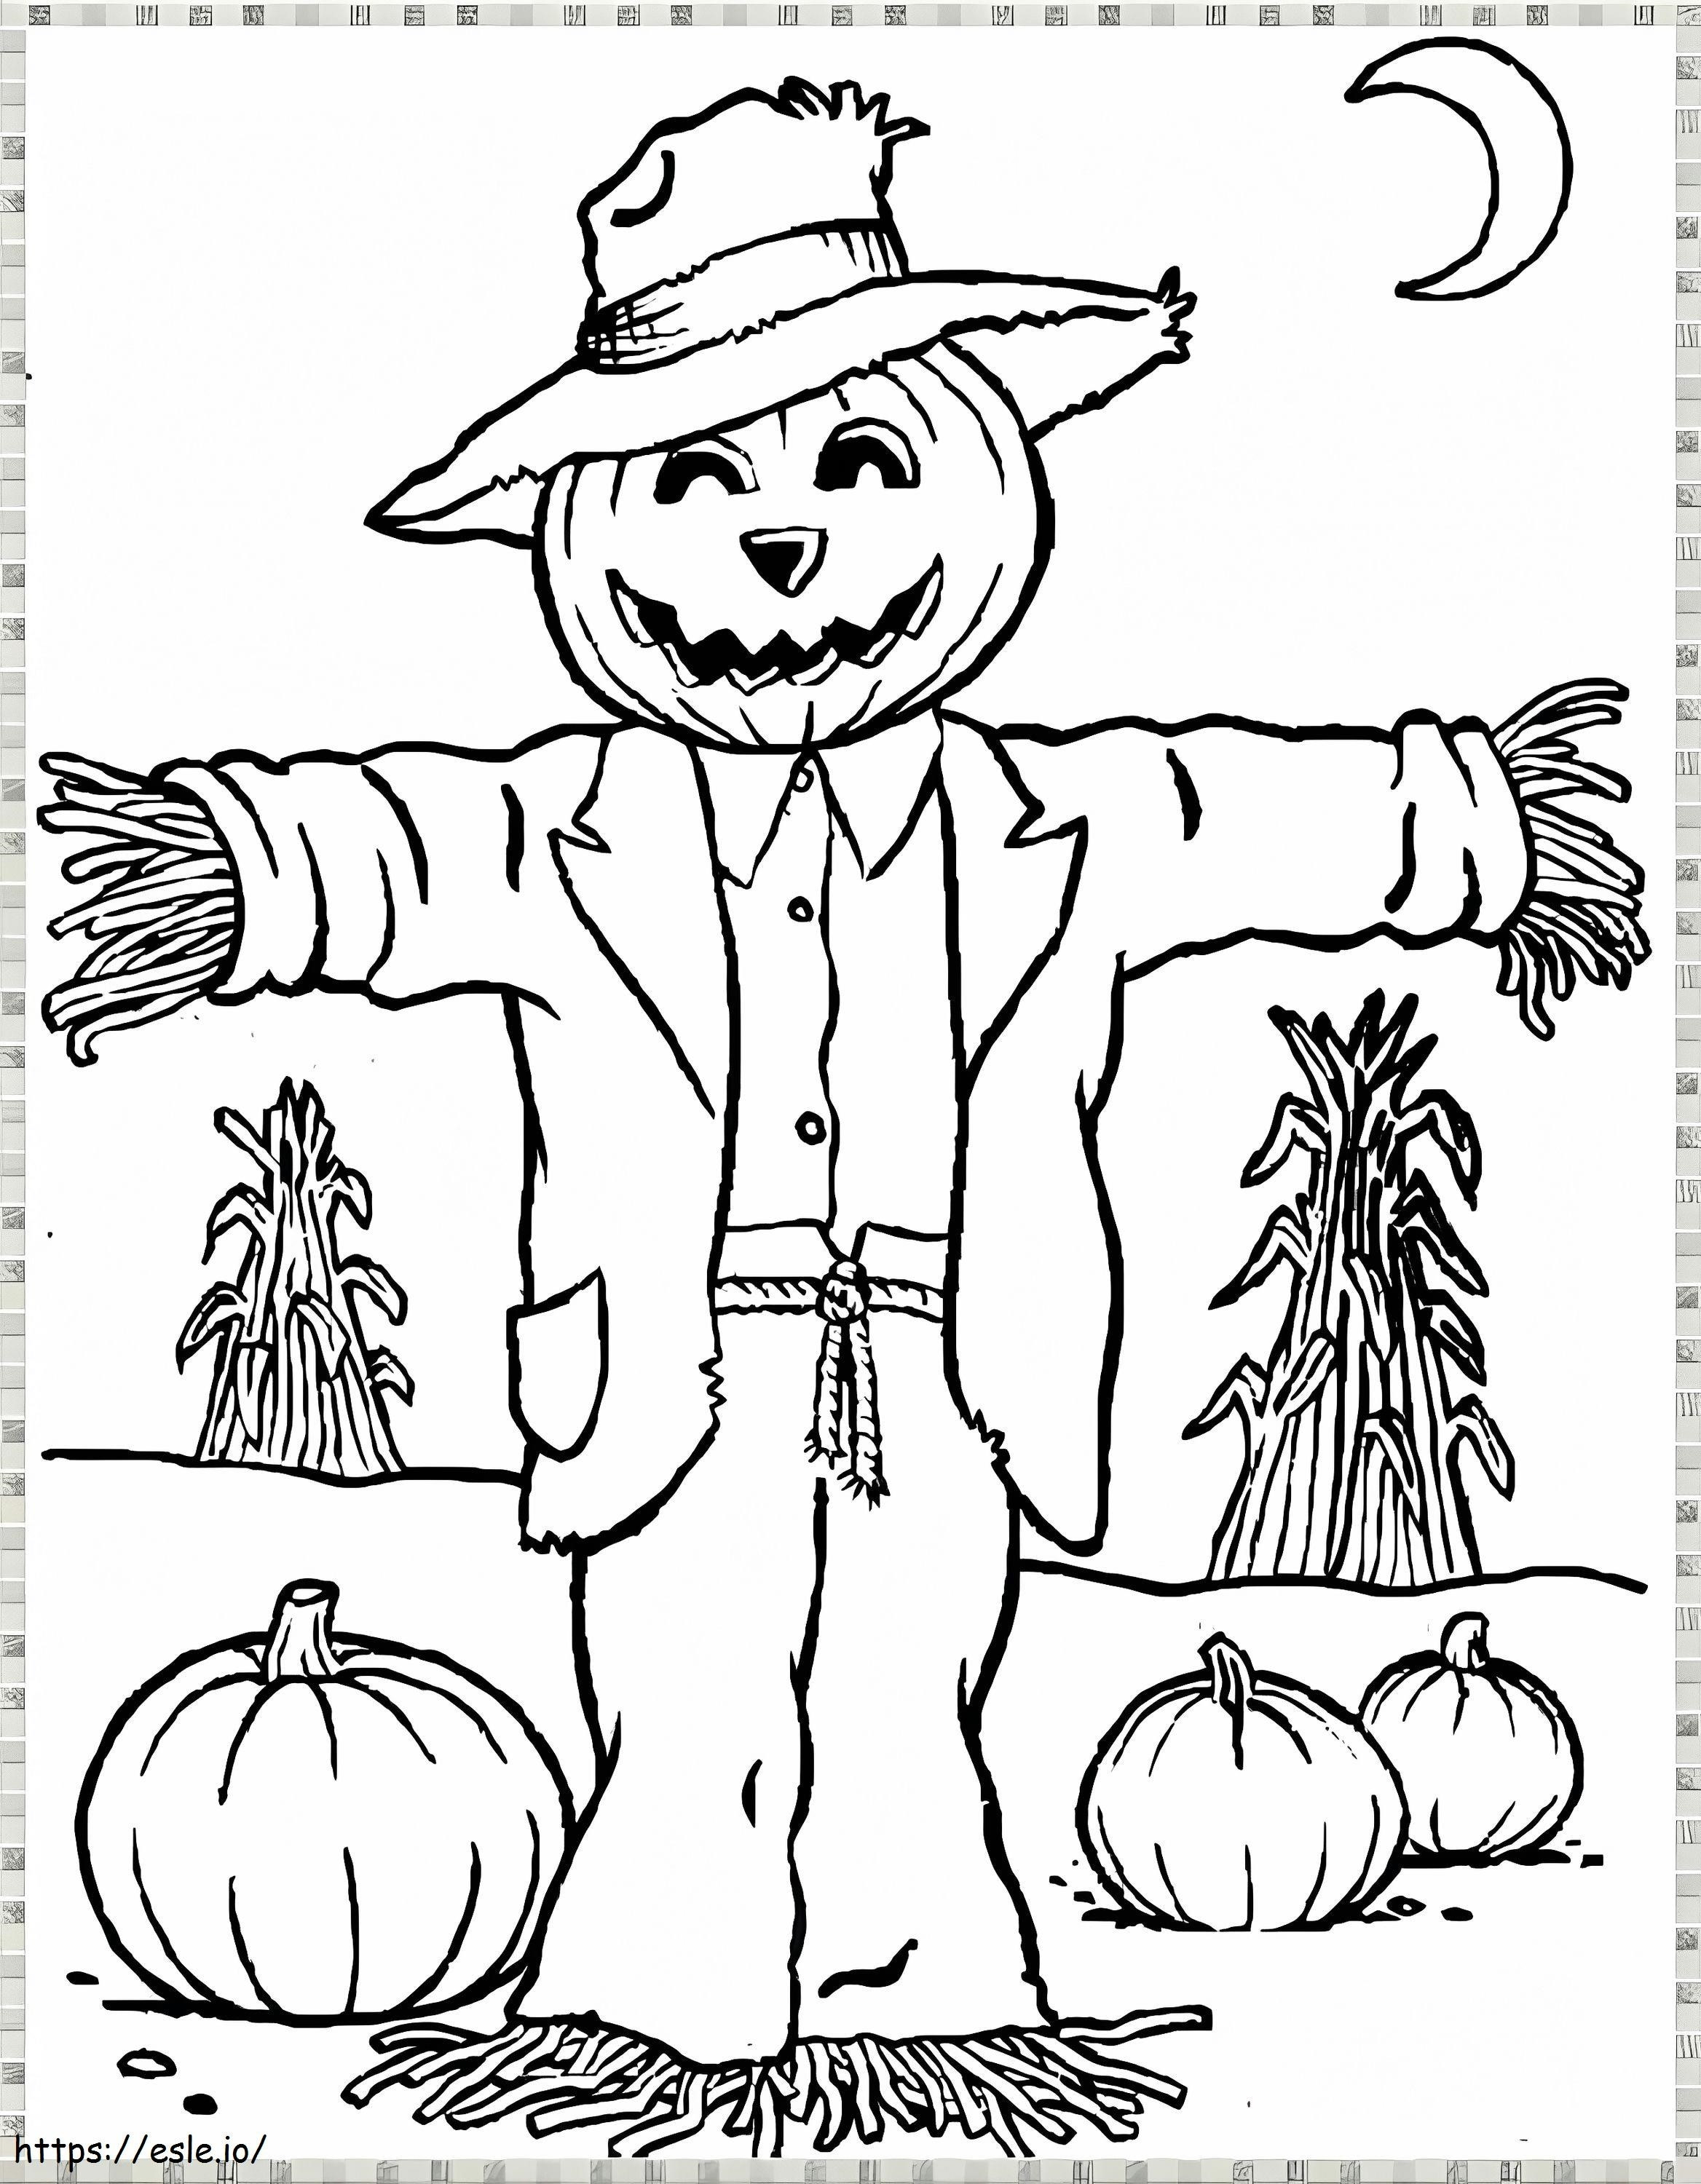 Scarecrow Fun coloring page